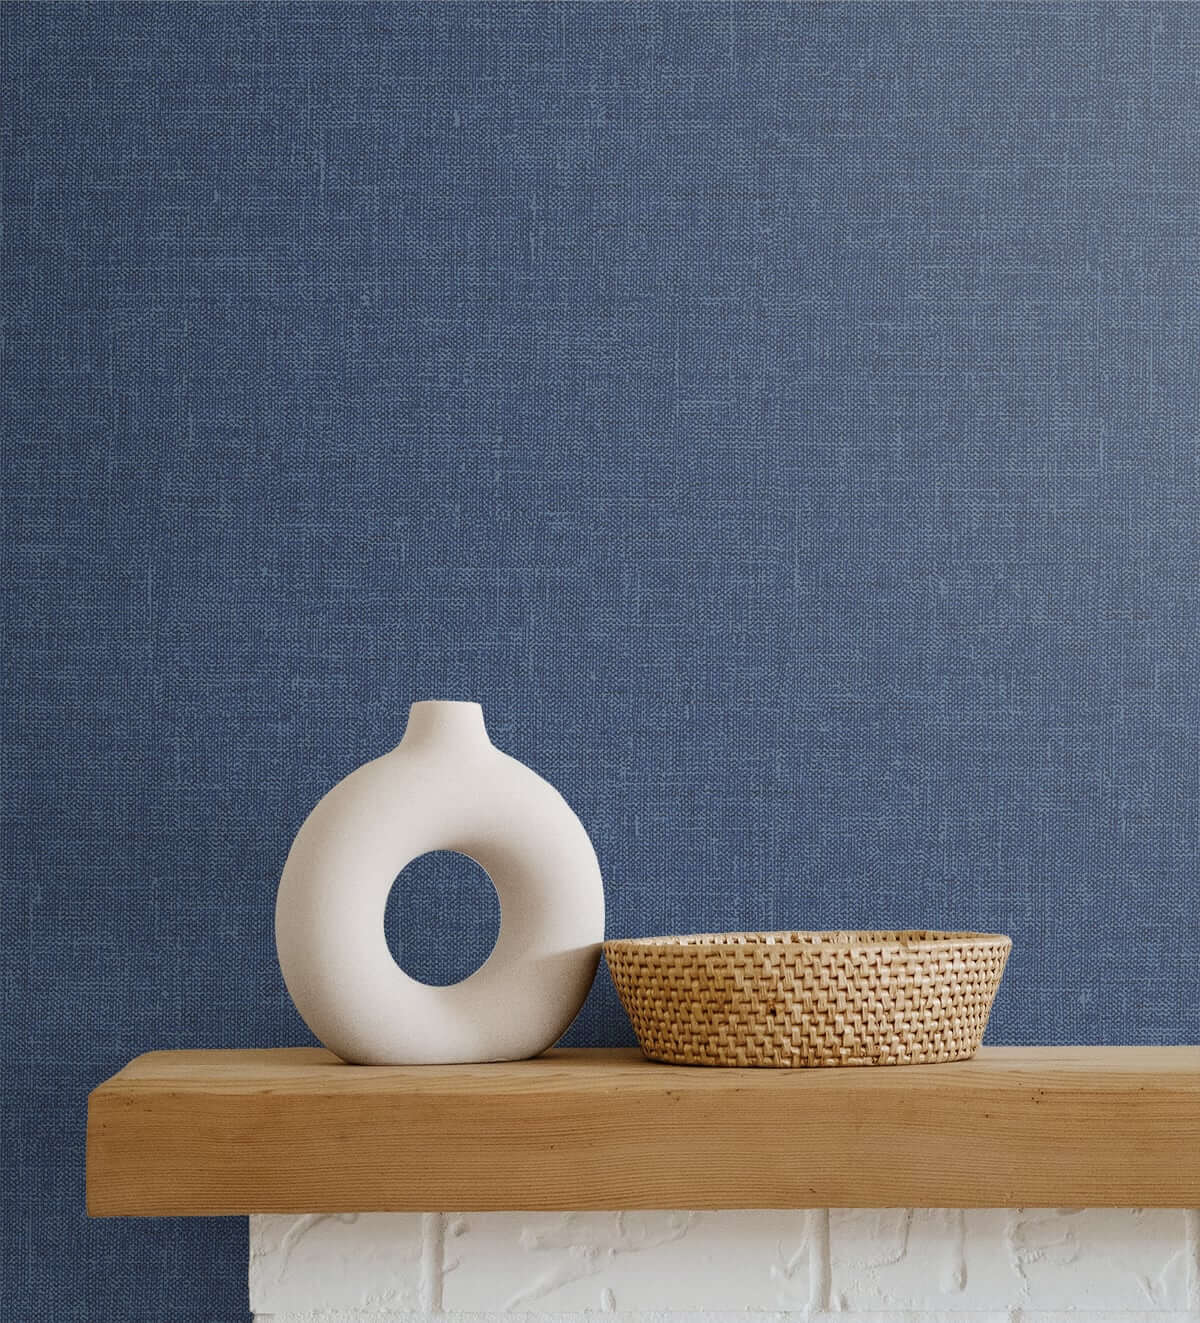 Seabrook The Simple Life Soft Linen Wallpaper - Navy Blue